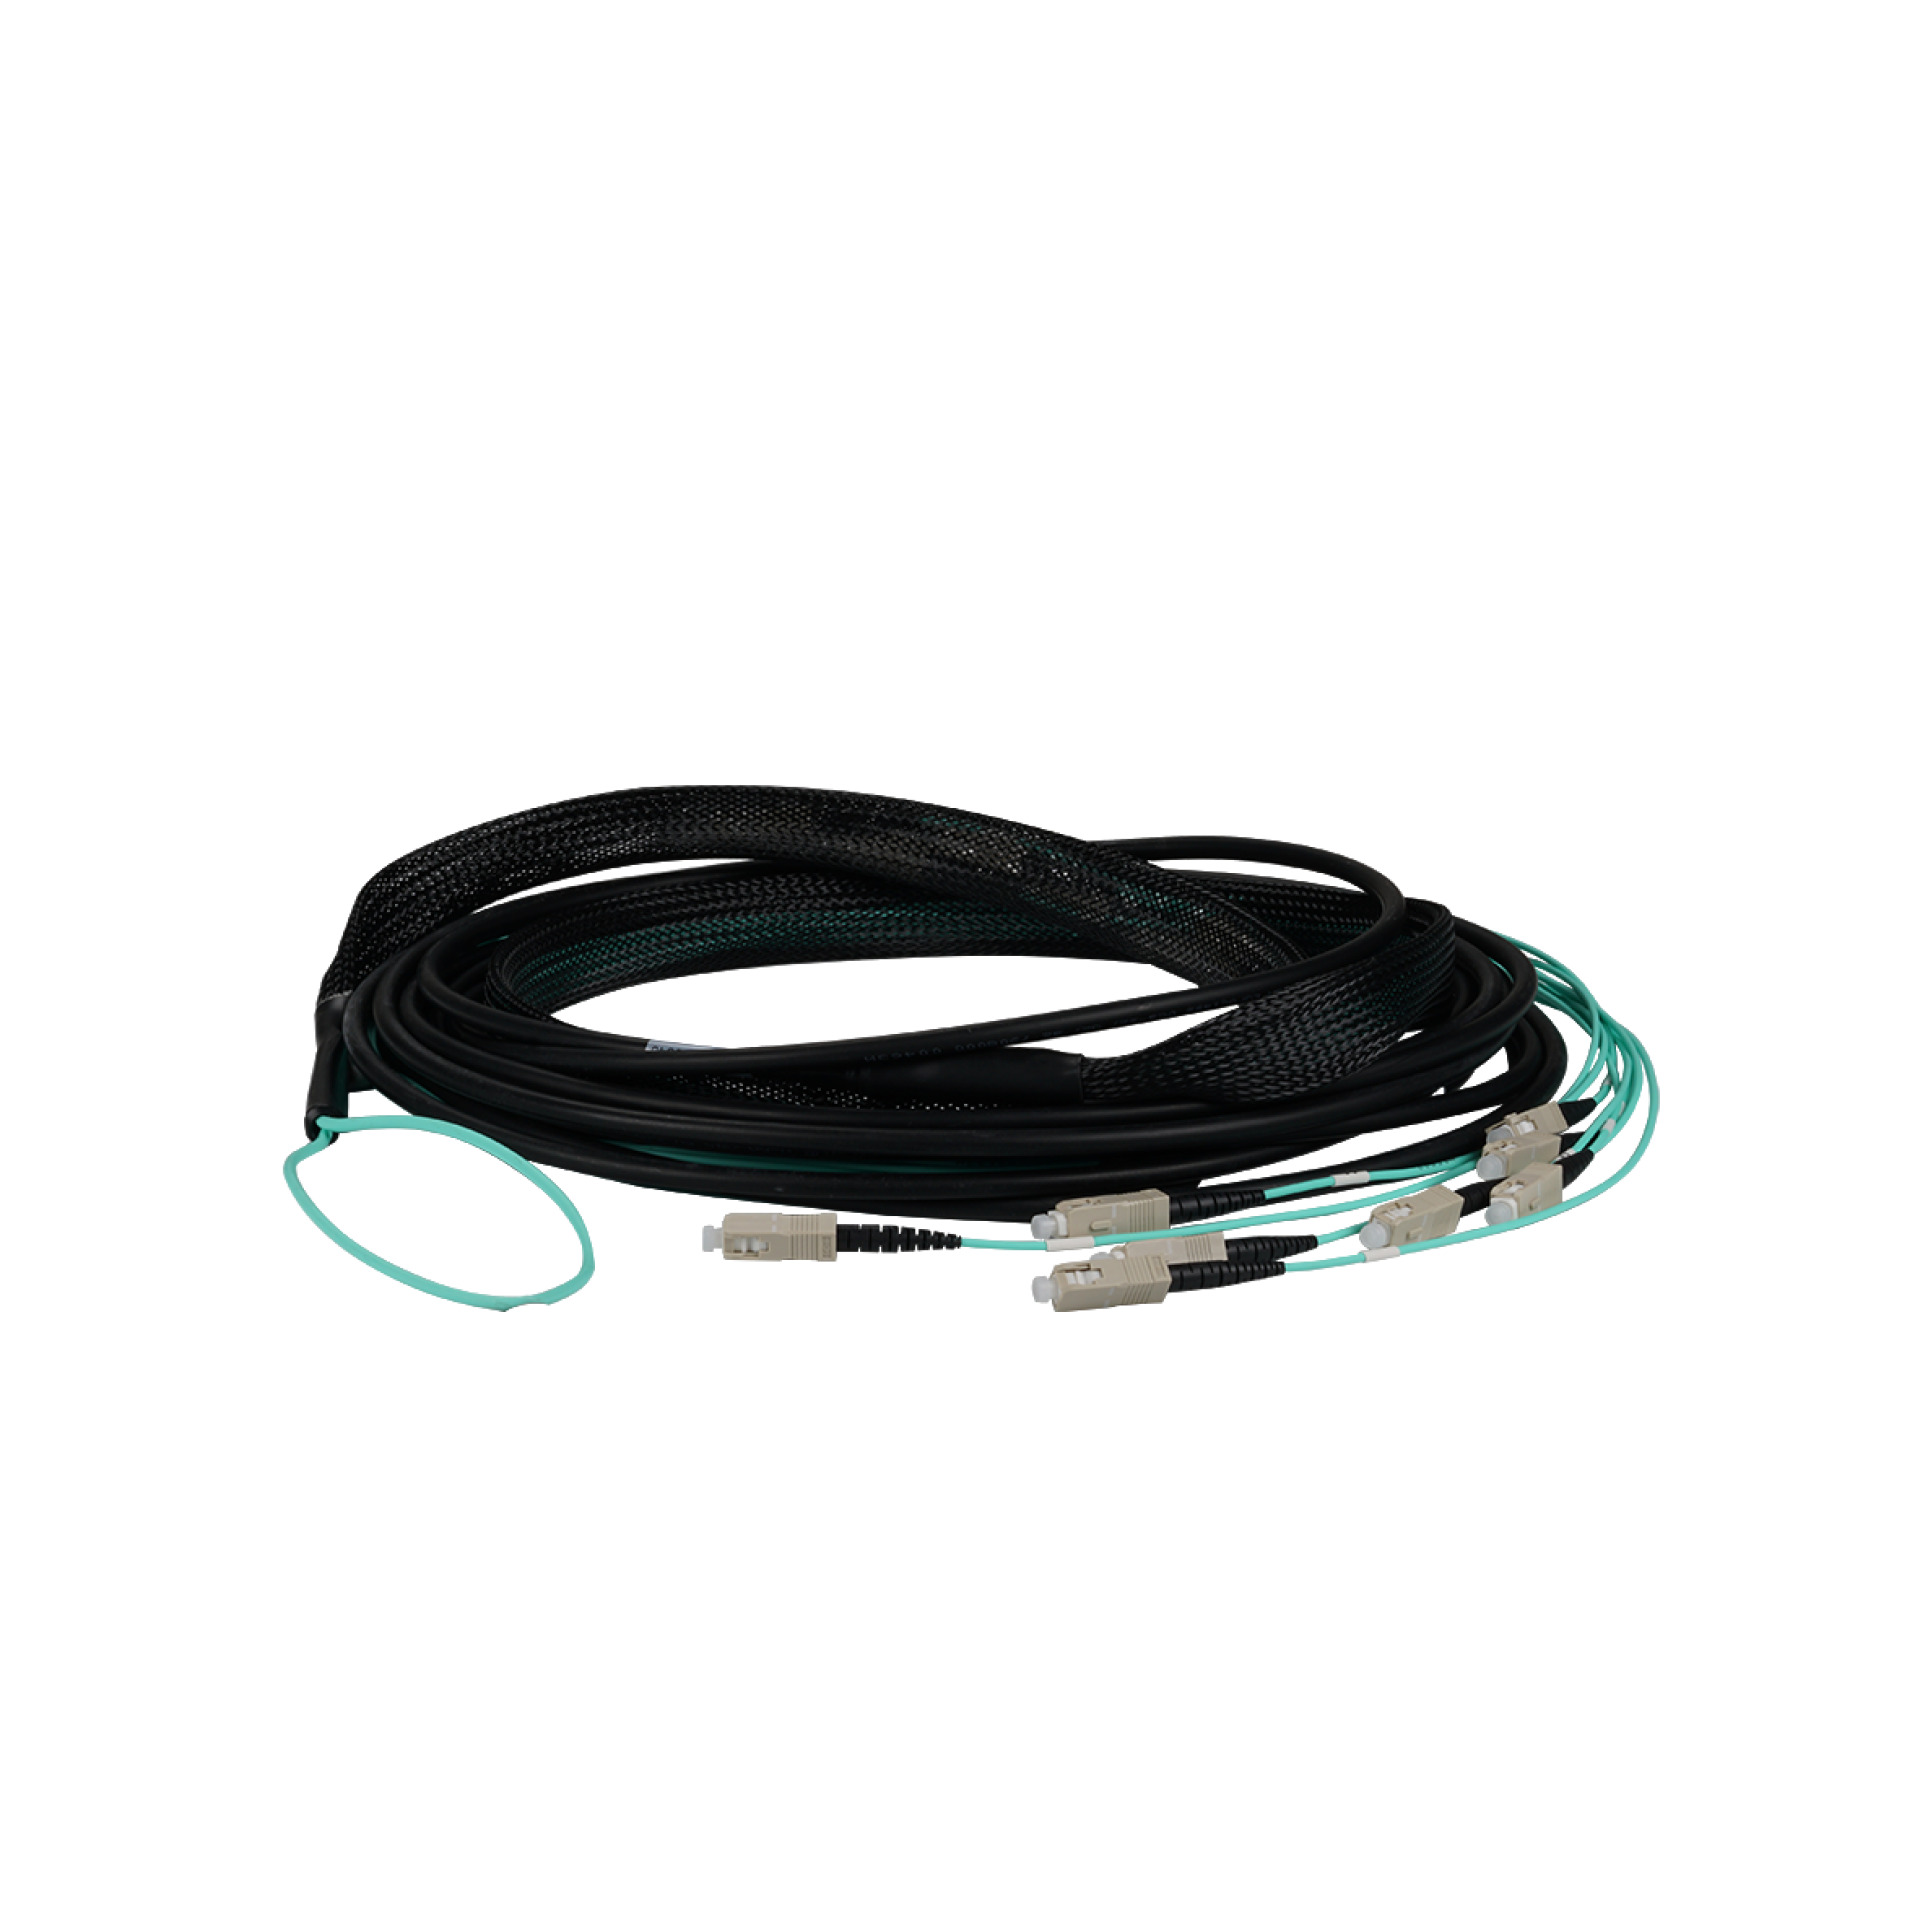 Trunk cable U-DQ(ZN)BH 8G 50/125, SC/SC OM3 130m